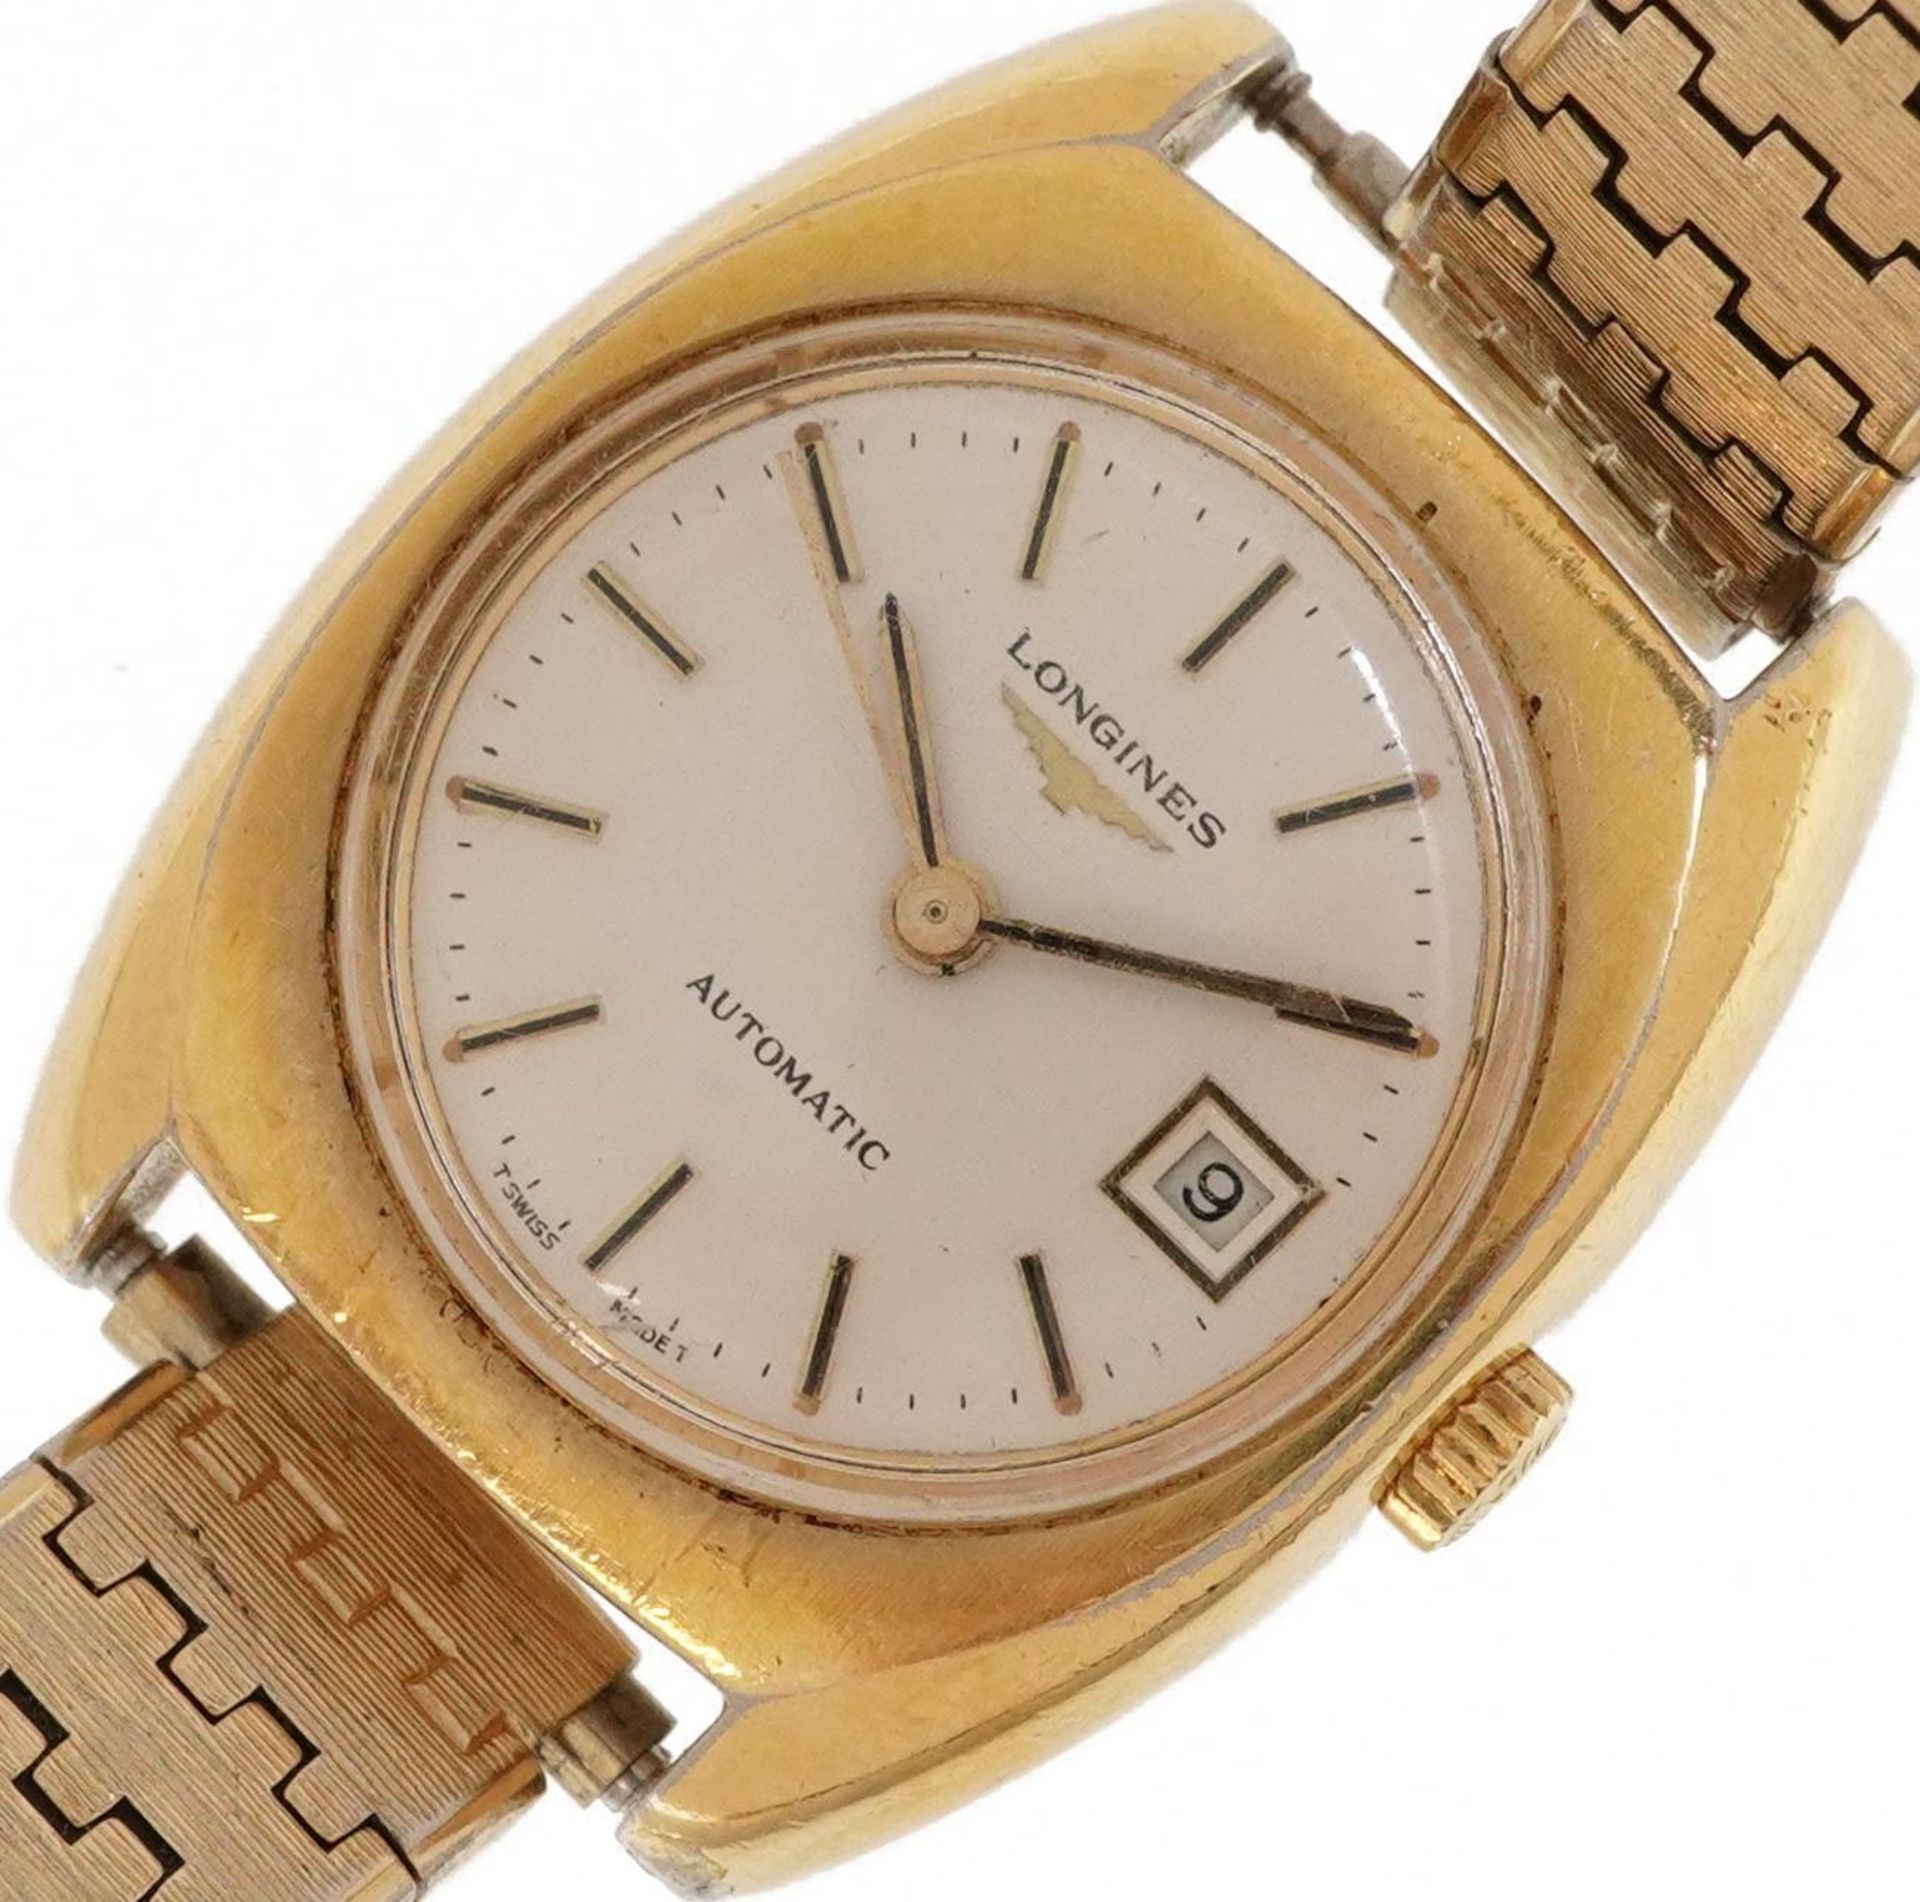 Longines, ladies gold plated automatic wristwatch with date aperture, the case 25mm wide : For